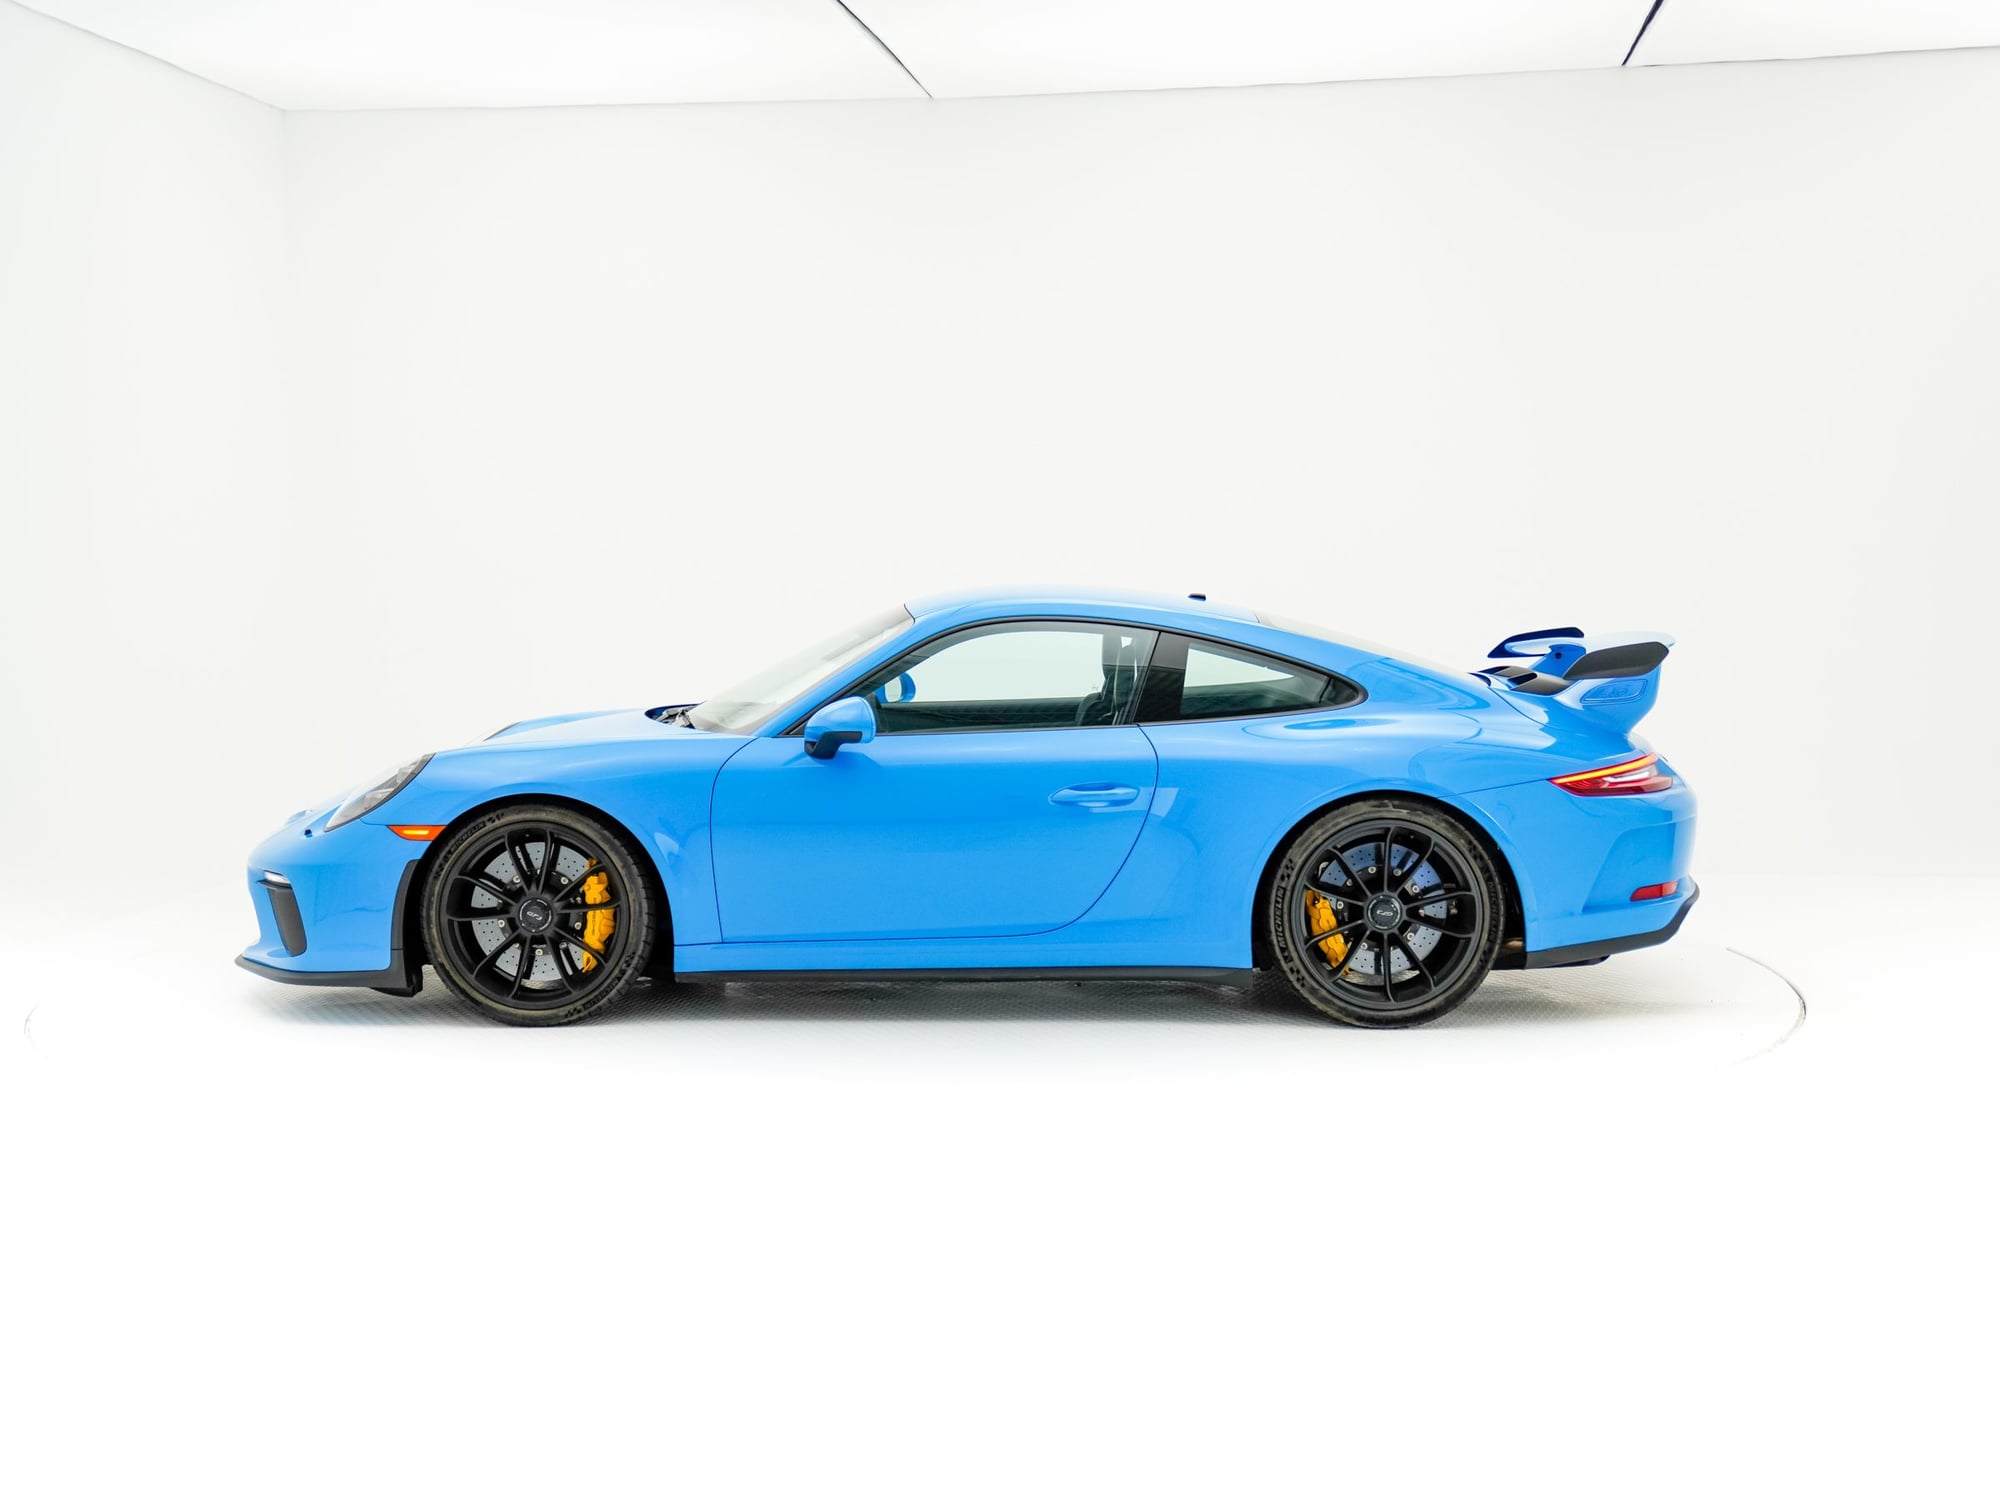 2018 Porsche GT3 - Dealer Inventory: Certified Pre-Owned 2018 Porsche 911 GT3 PTS Mexico Blue - Used - VIN WP0AC2A97JS174965 - 402 Miles - 6 cyl - 2WD - Manual - Coupe - Blue - Beaverton, OR 97005, United States